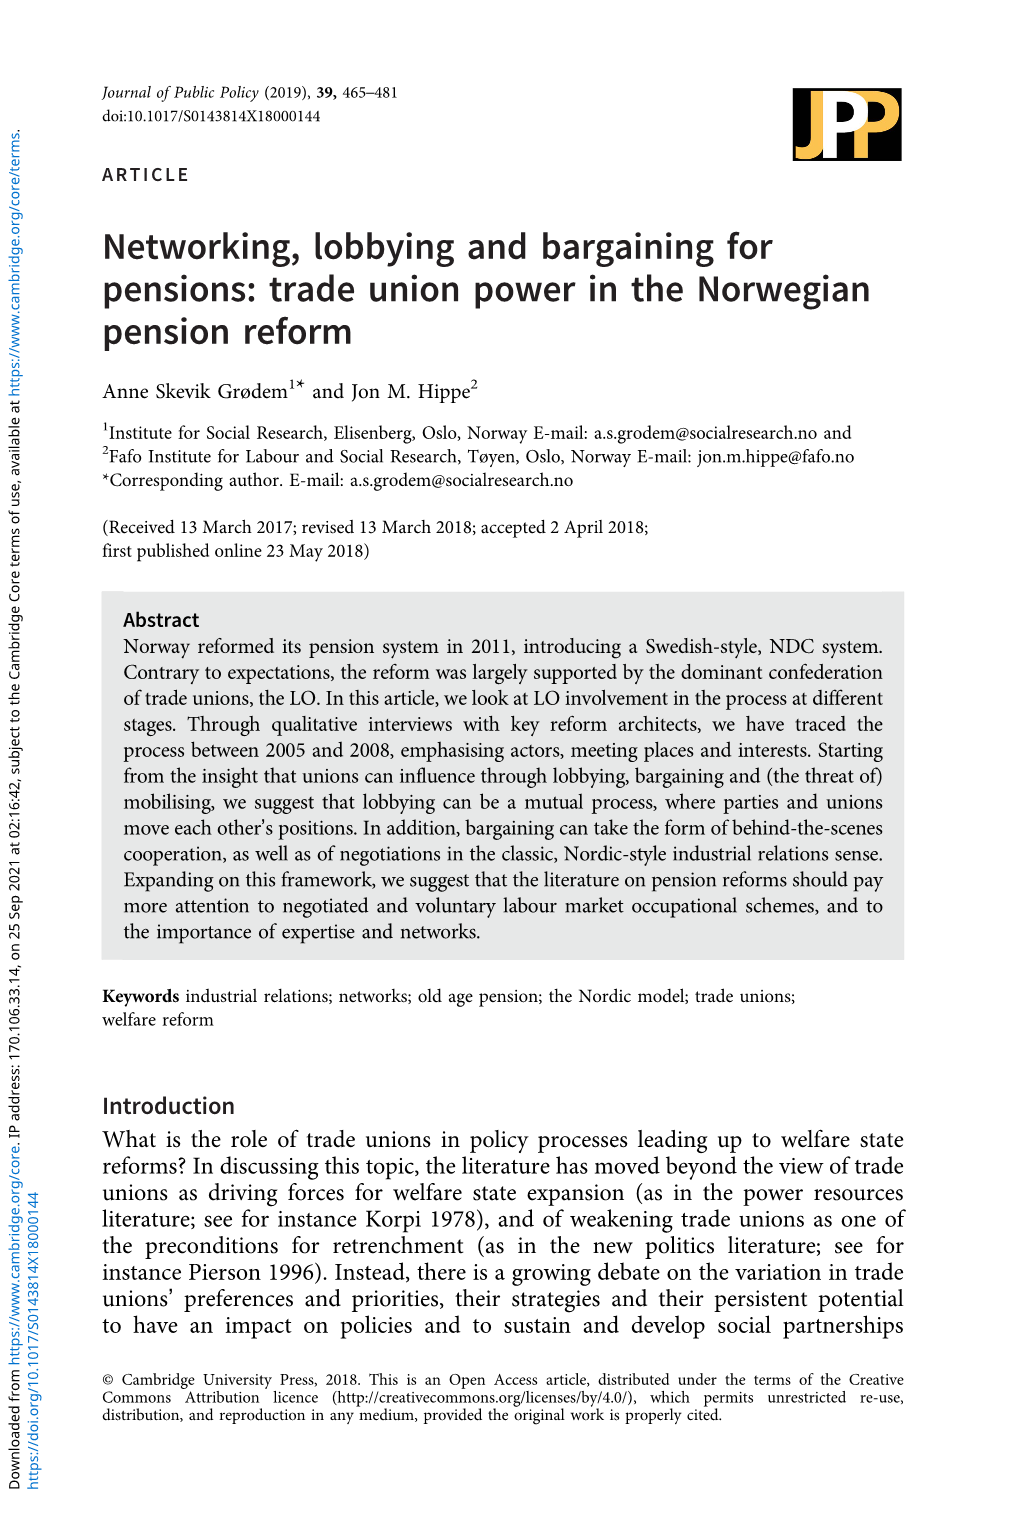 Networking, Lobbying and Bargaining for Pensions: Trade Union Power in the Norwegian Pension Reform